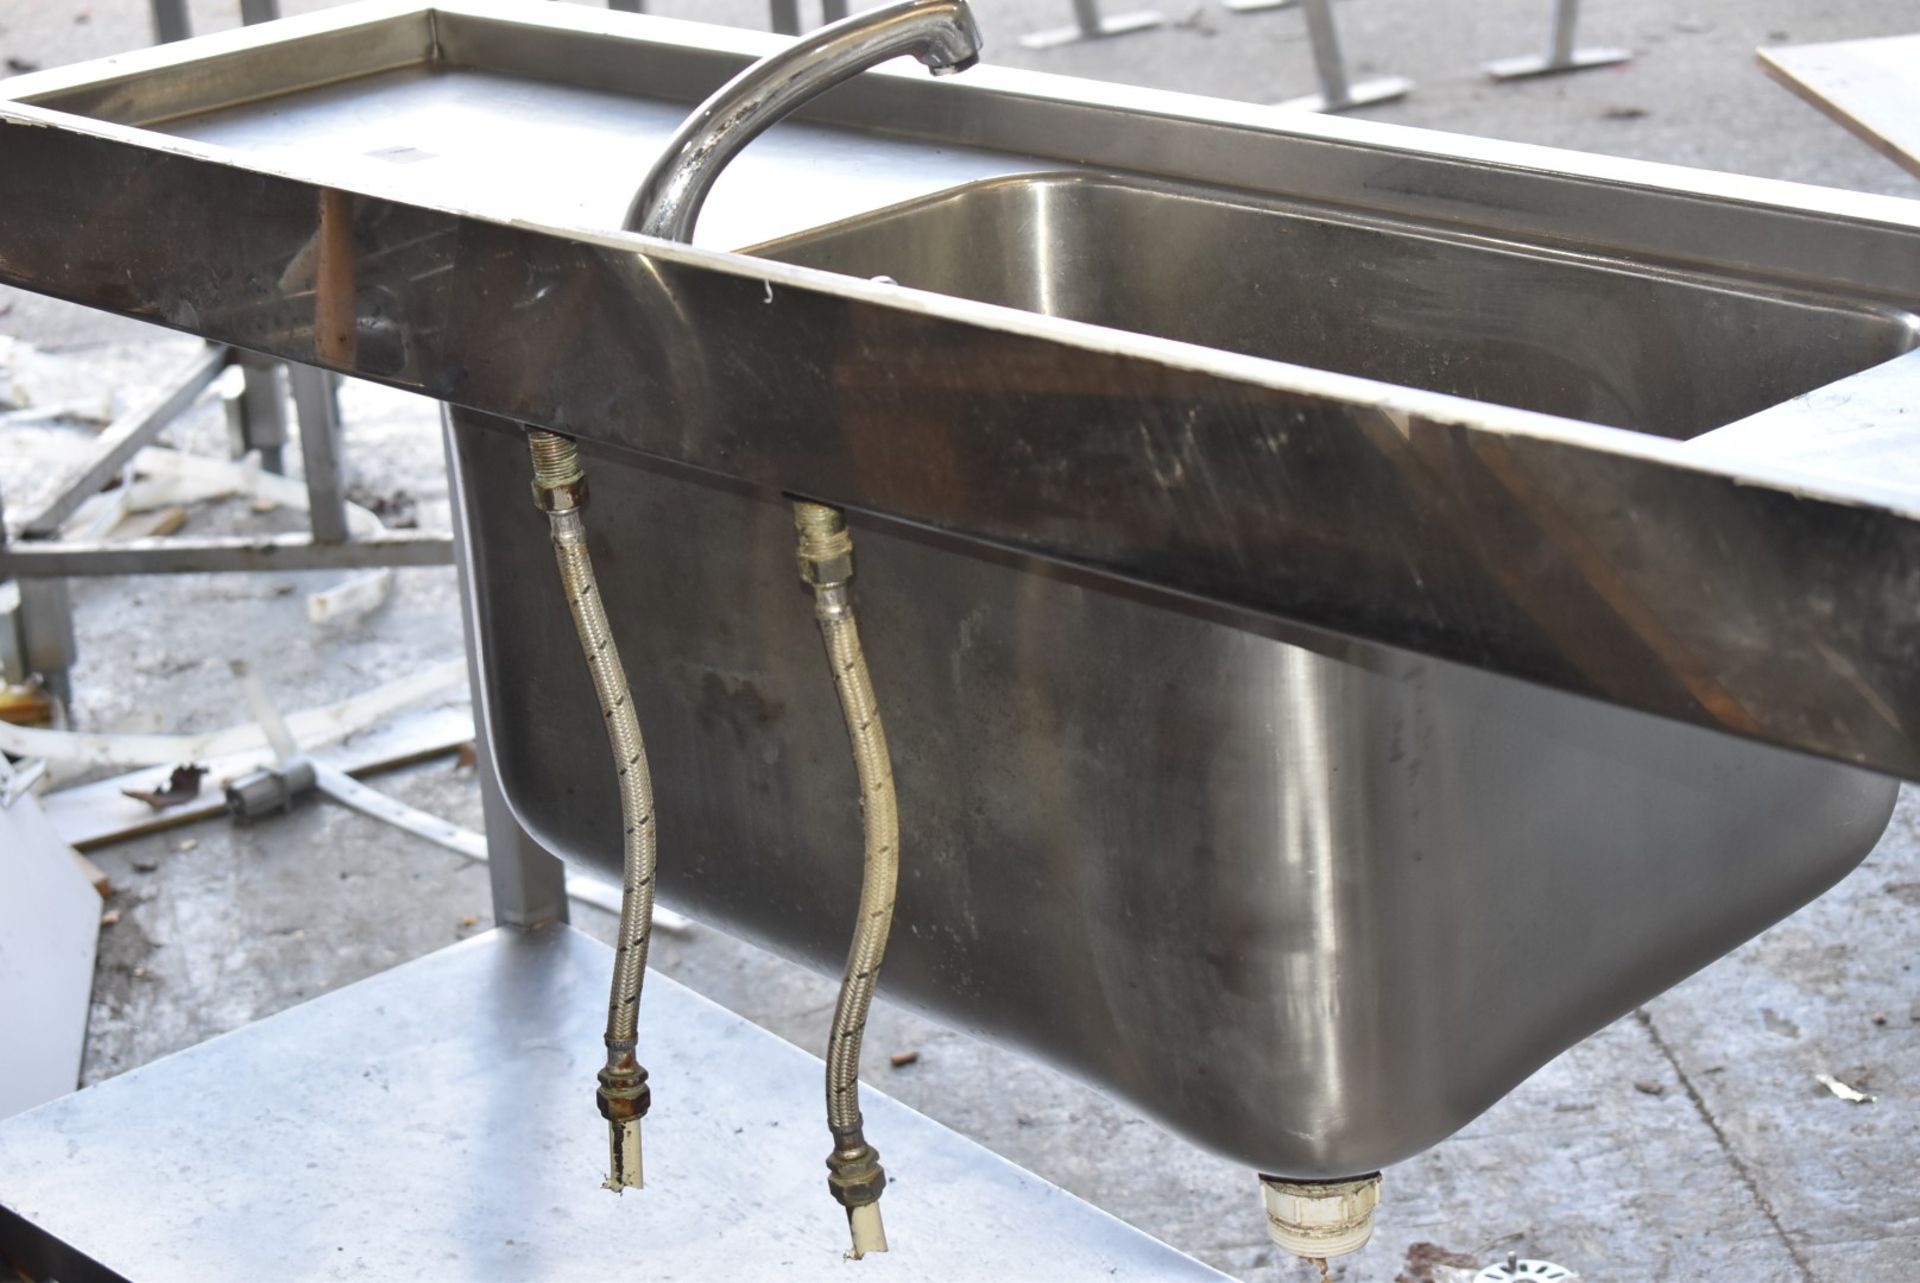 1 x Stainless Steel Wash Unit With Single Basin, Mixer Tap, Undershelf, Corner Upstand - Width 190cm - Image 6 of 11